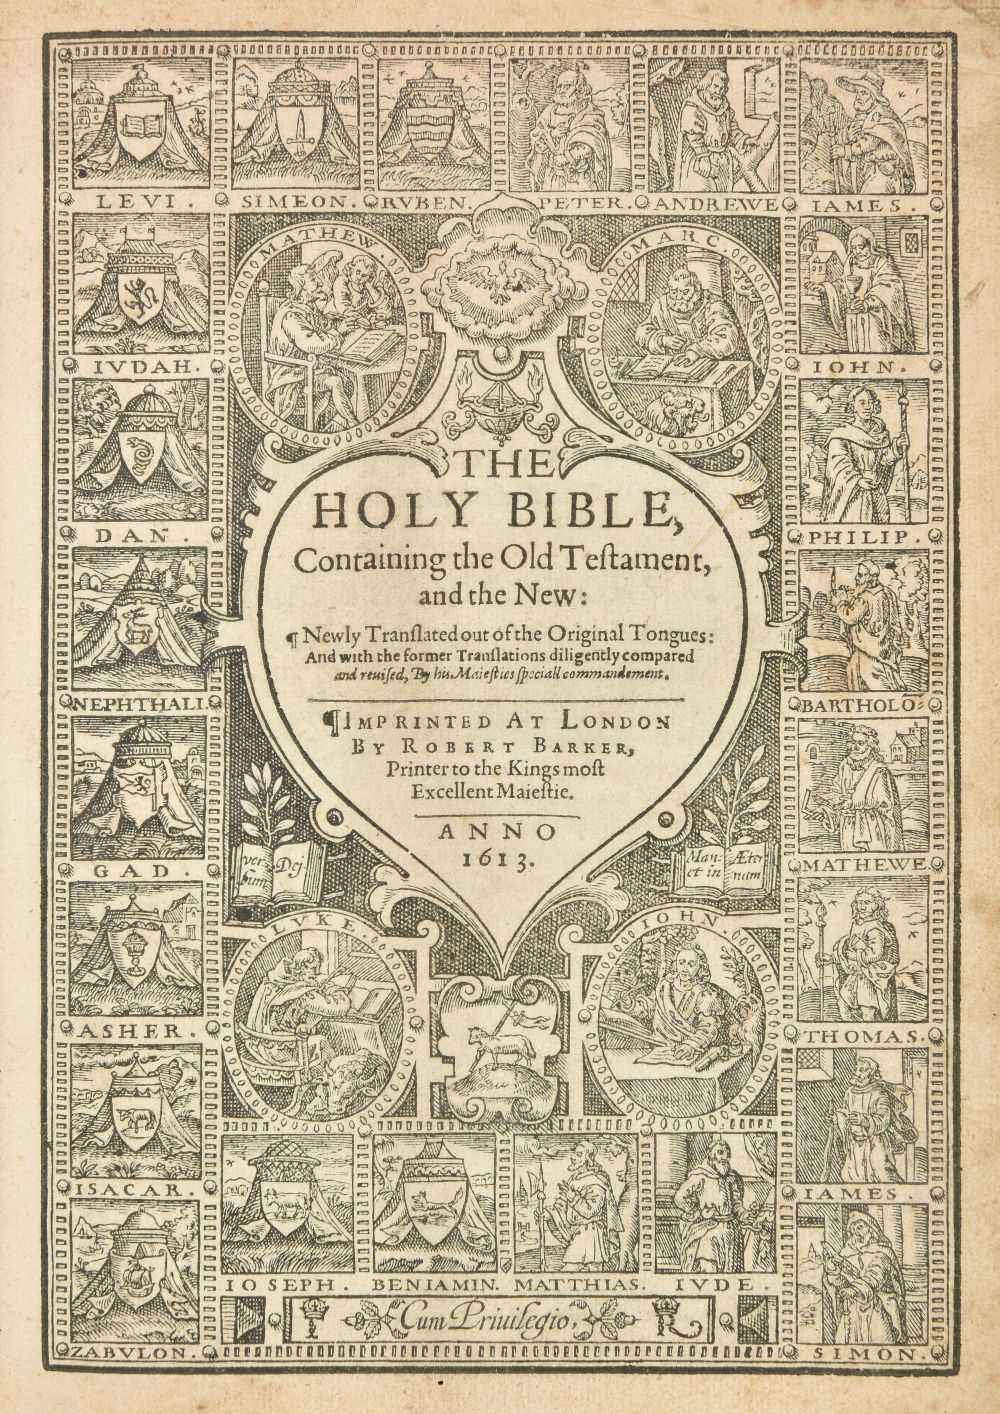 Bible [English], The Holy Bible, Containing the Old Testament, and the New...